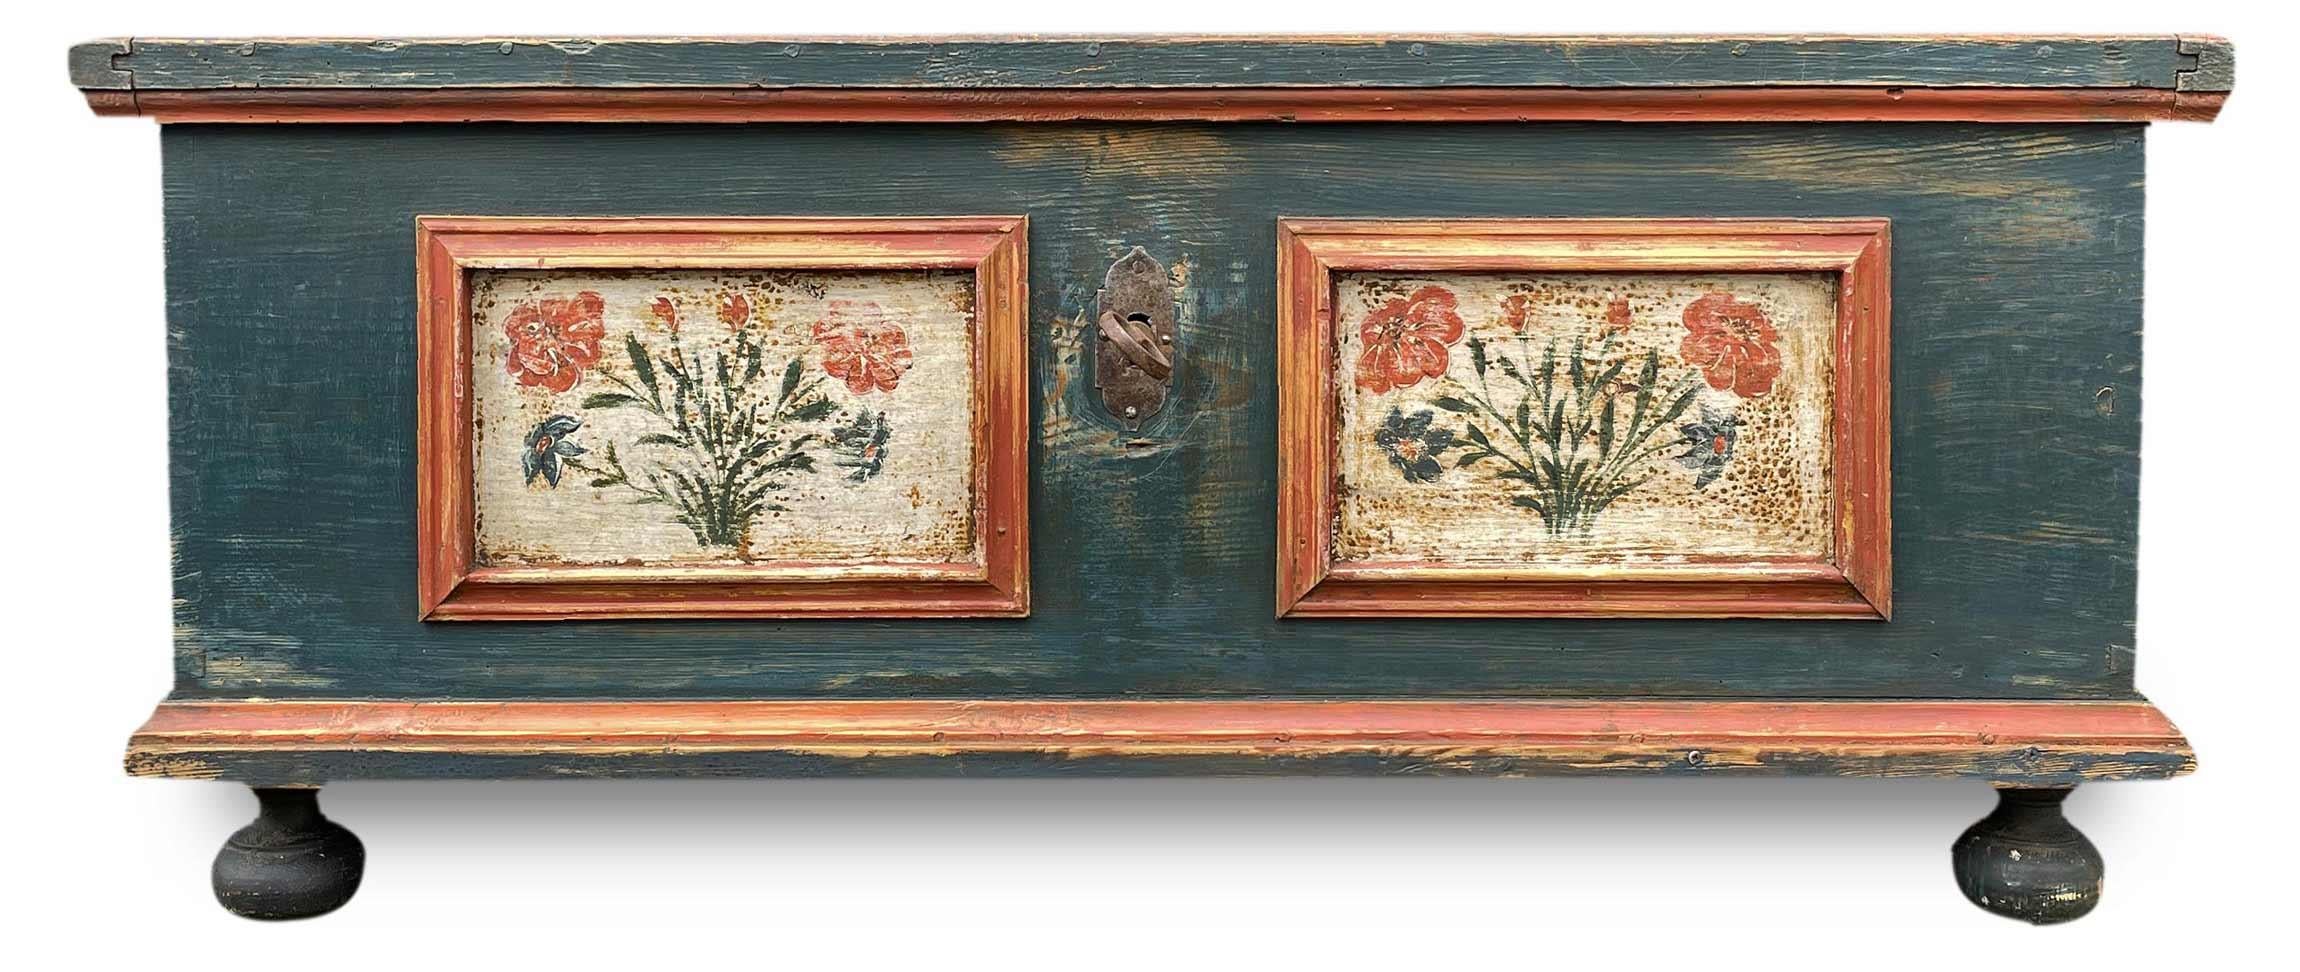 Blue Painted Chest

Measurements: H.52 – L.123 – P.61
Period: Early 19th century
Origin: Tyrol
Essence: Fir

Tyrolean painted chest entirely painted in teal blue. On the front there are two generous panels framed in red containing bouquets of